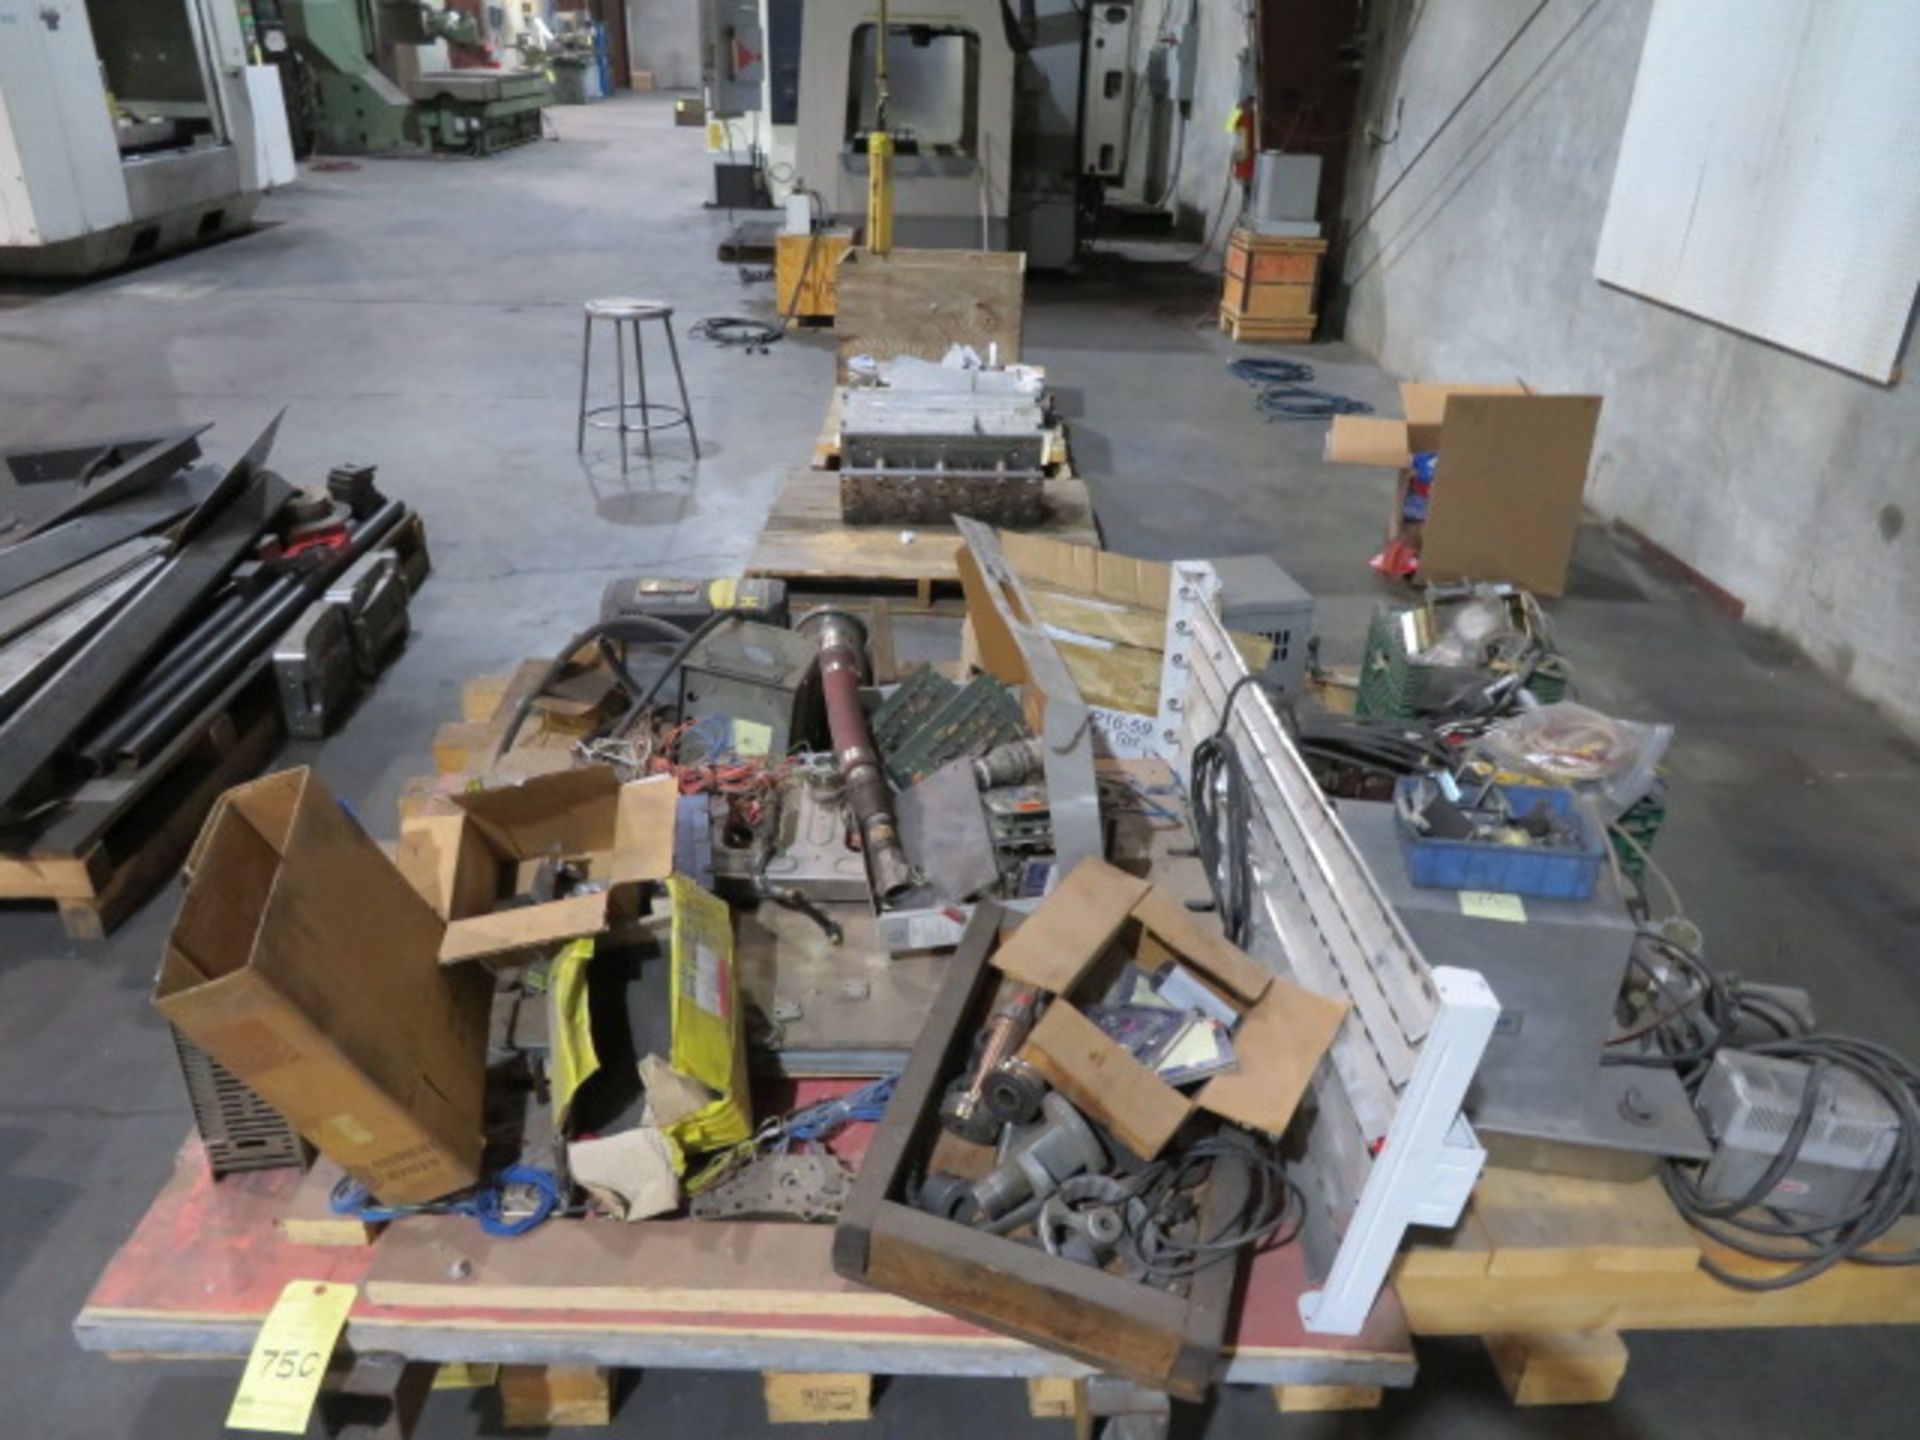 LOT CONSISTING OF: assorted electrical & electronic, repair parts (out of service)